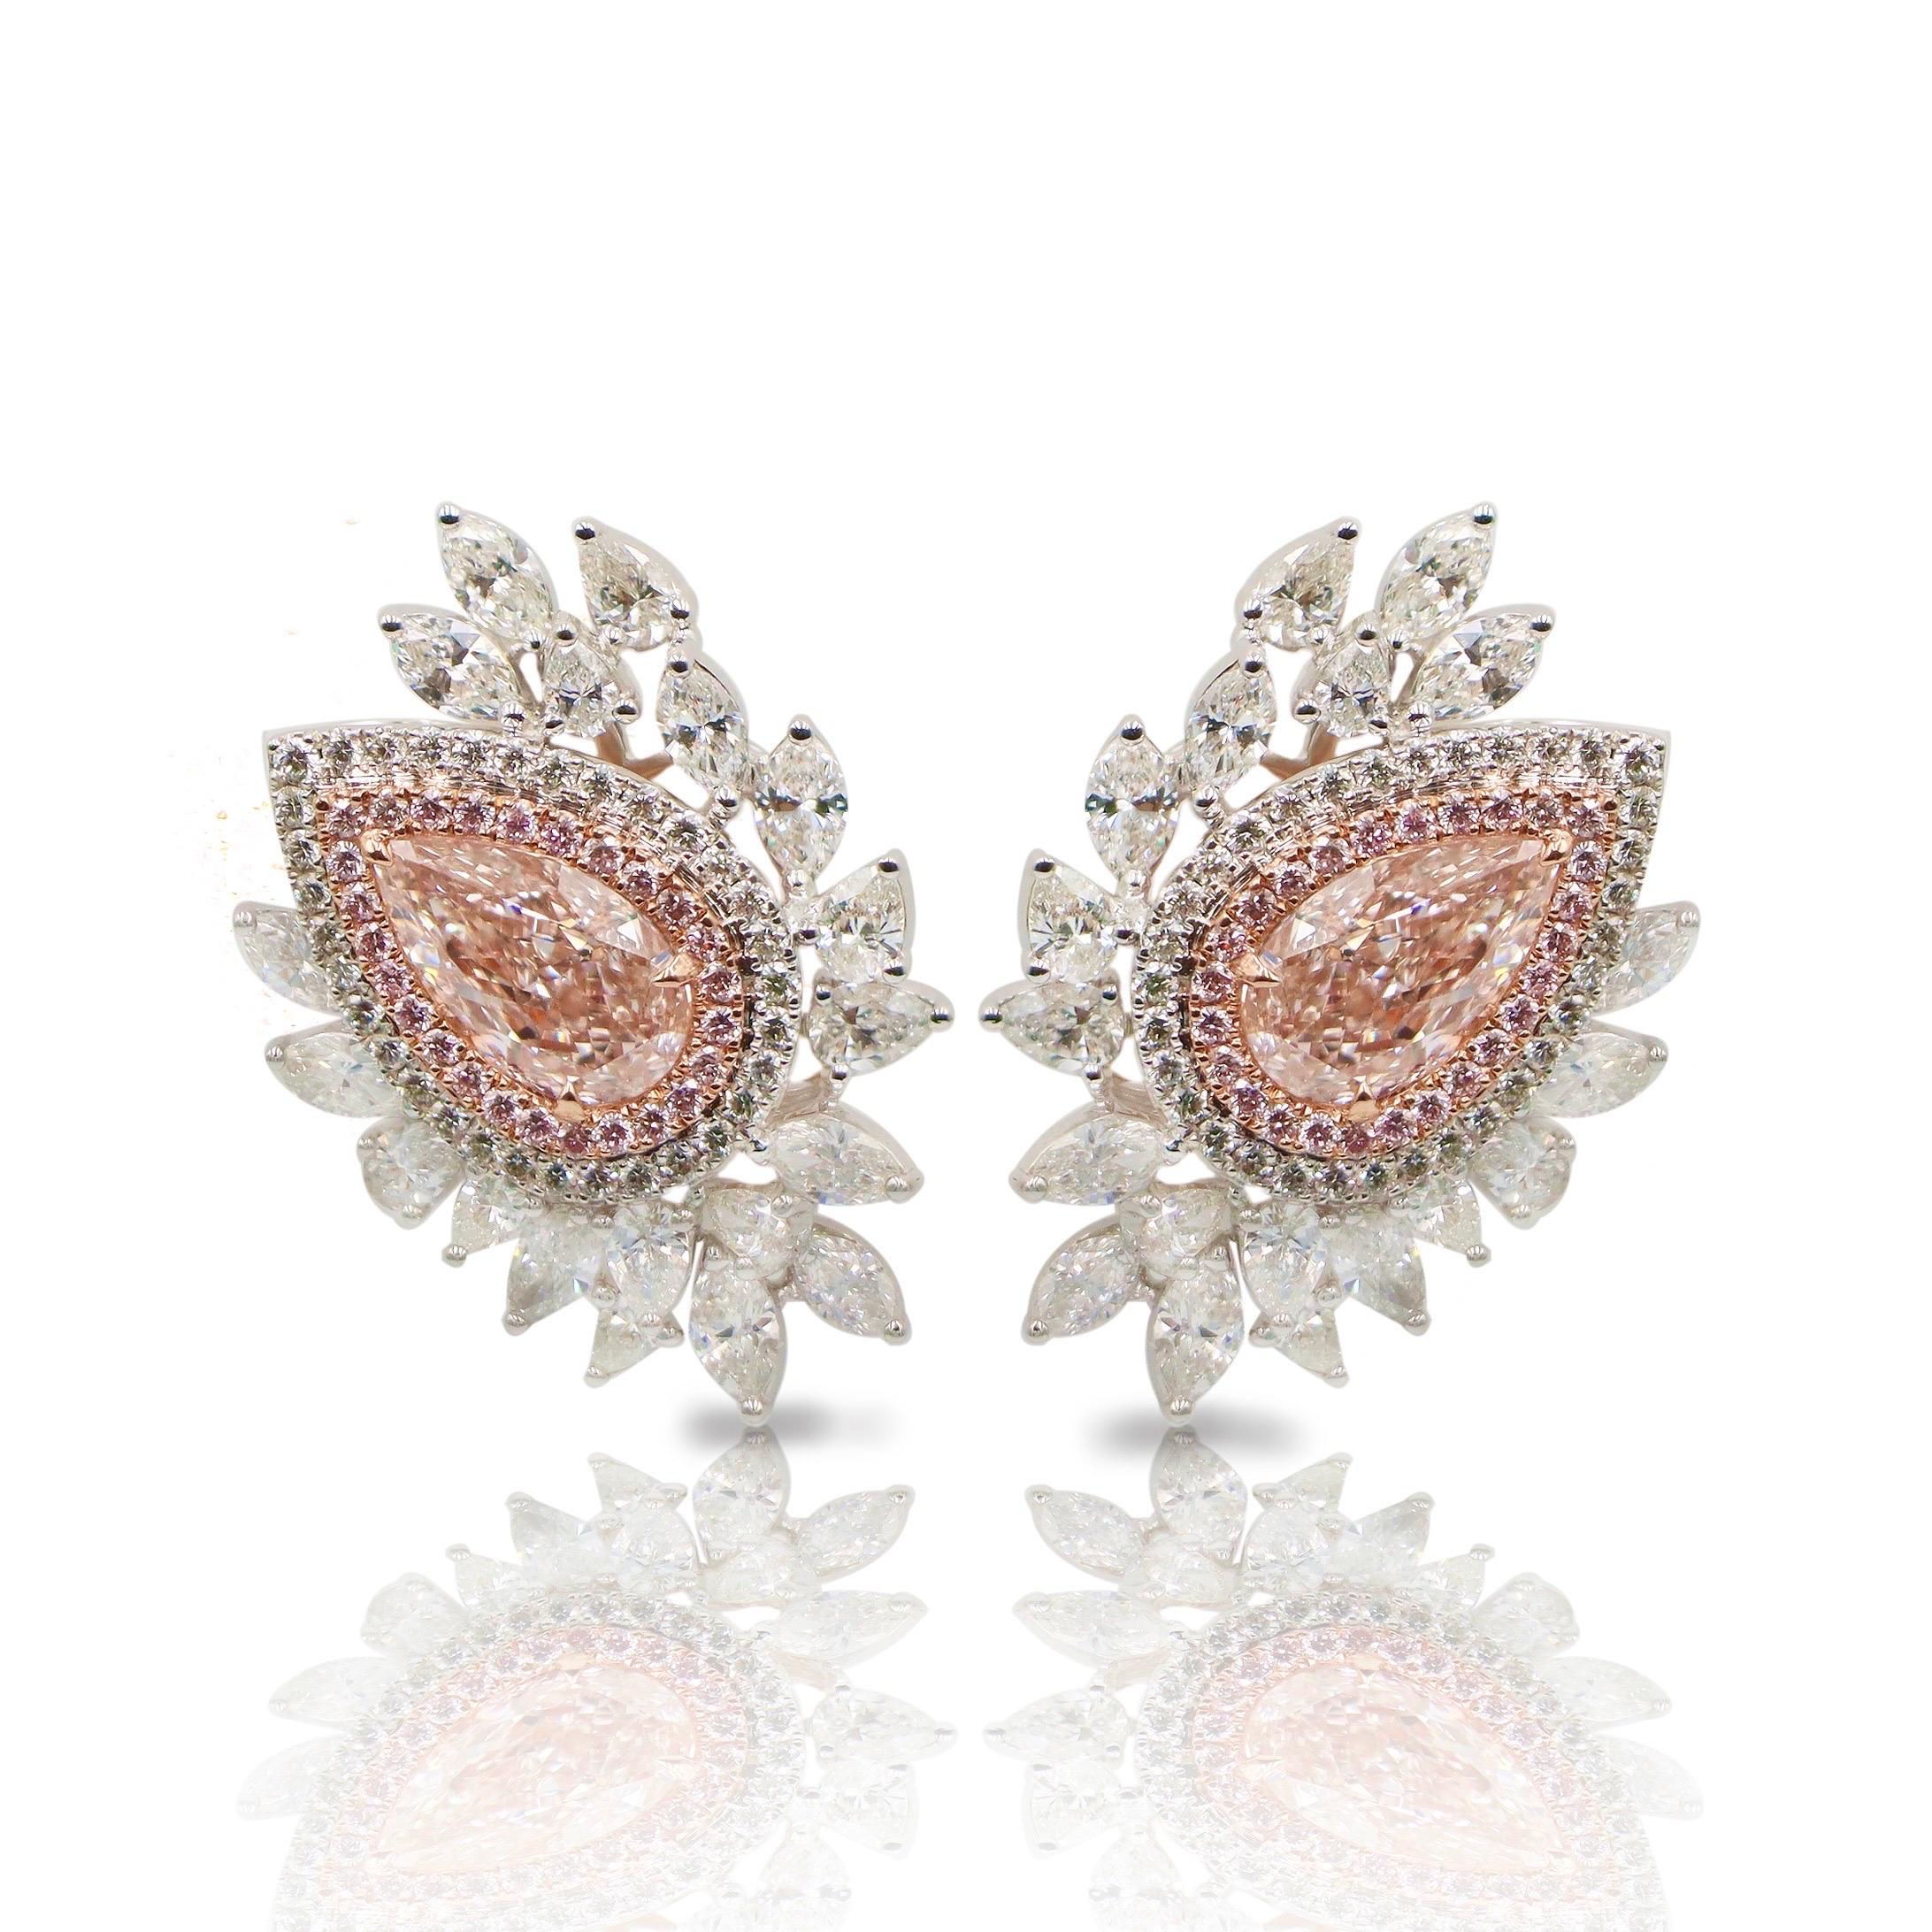 Emilio Jewelry Gia Certified 3.75 Carat Very Light Pink Diamond Earrings  In New Condition For Sale In New York, NY